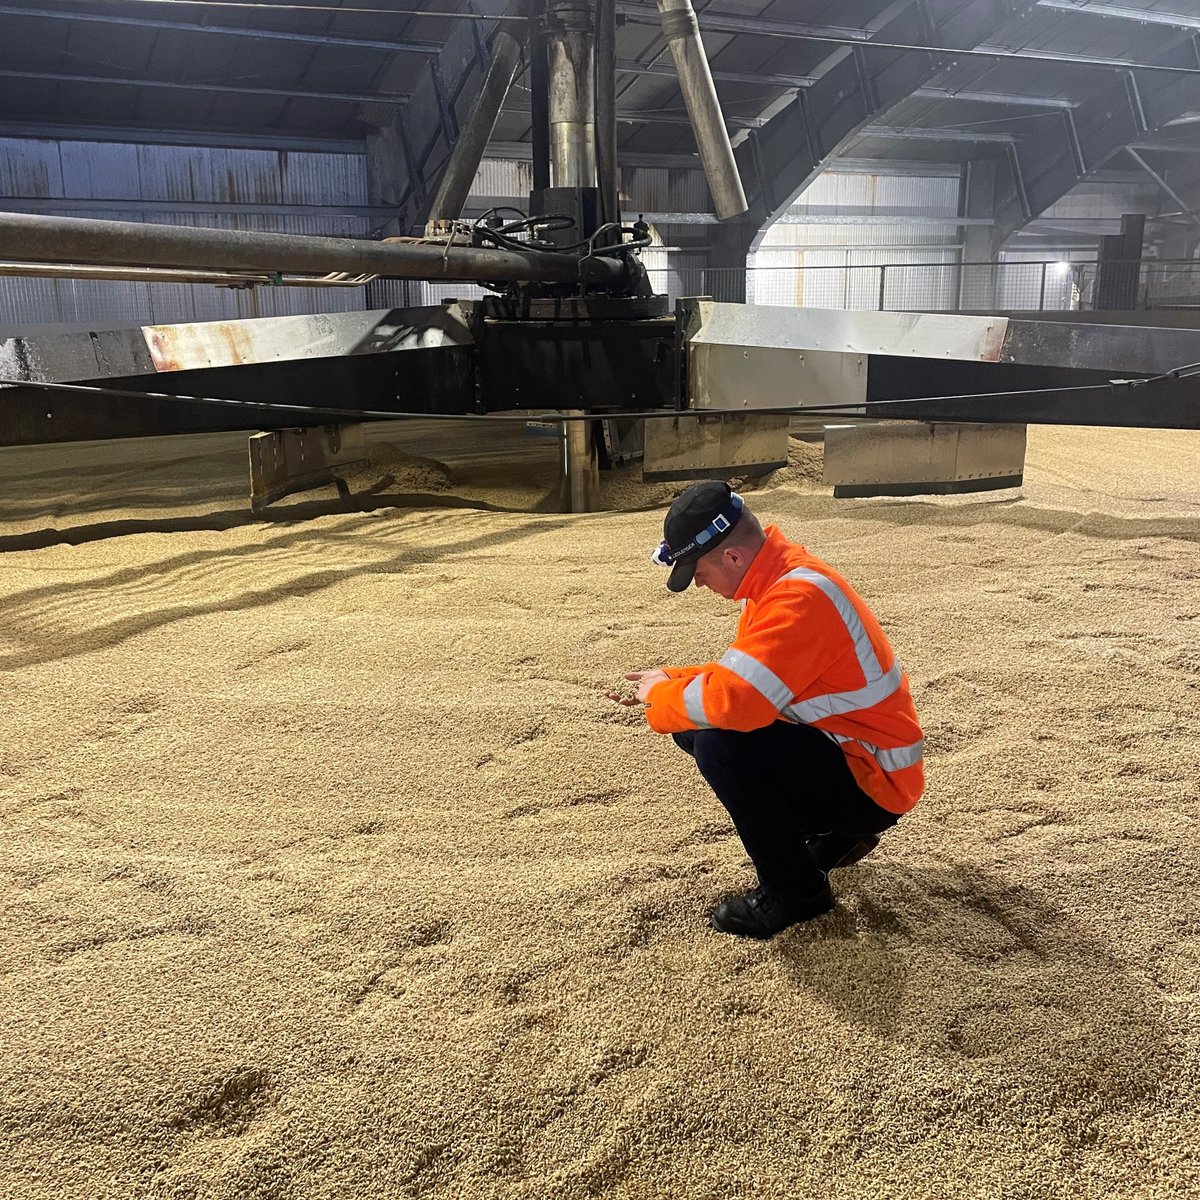 👨‍🔬 Meet Callum McIntosh, our multi-talented #ProductionAssistant at #Portgordon #Maltings in #Scotland. 
🌾 From discussing #DistillingMalt blends to being an on-call #firefighter, Callum brings his passion and expertise to every role he undertakes. 
🔗 hubs.ly/Q01YhBxr0